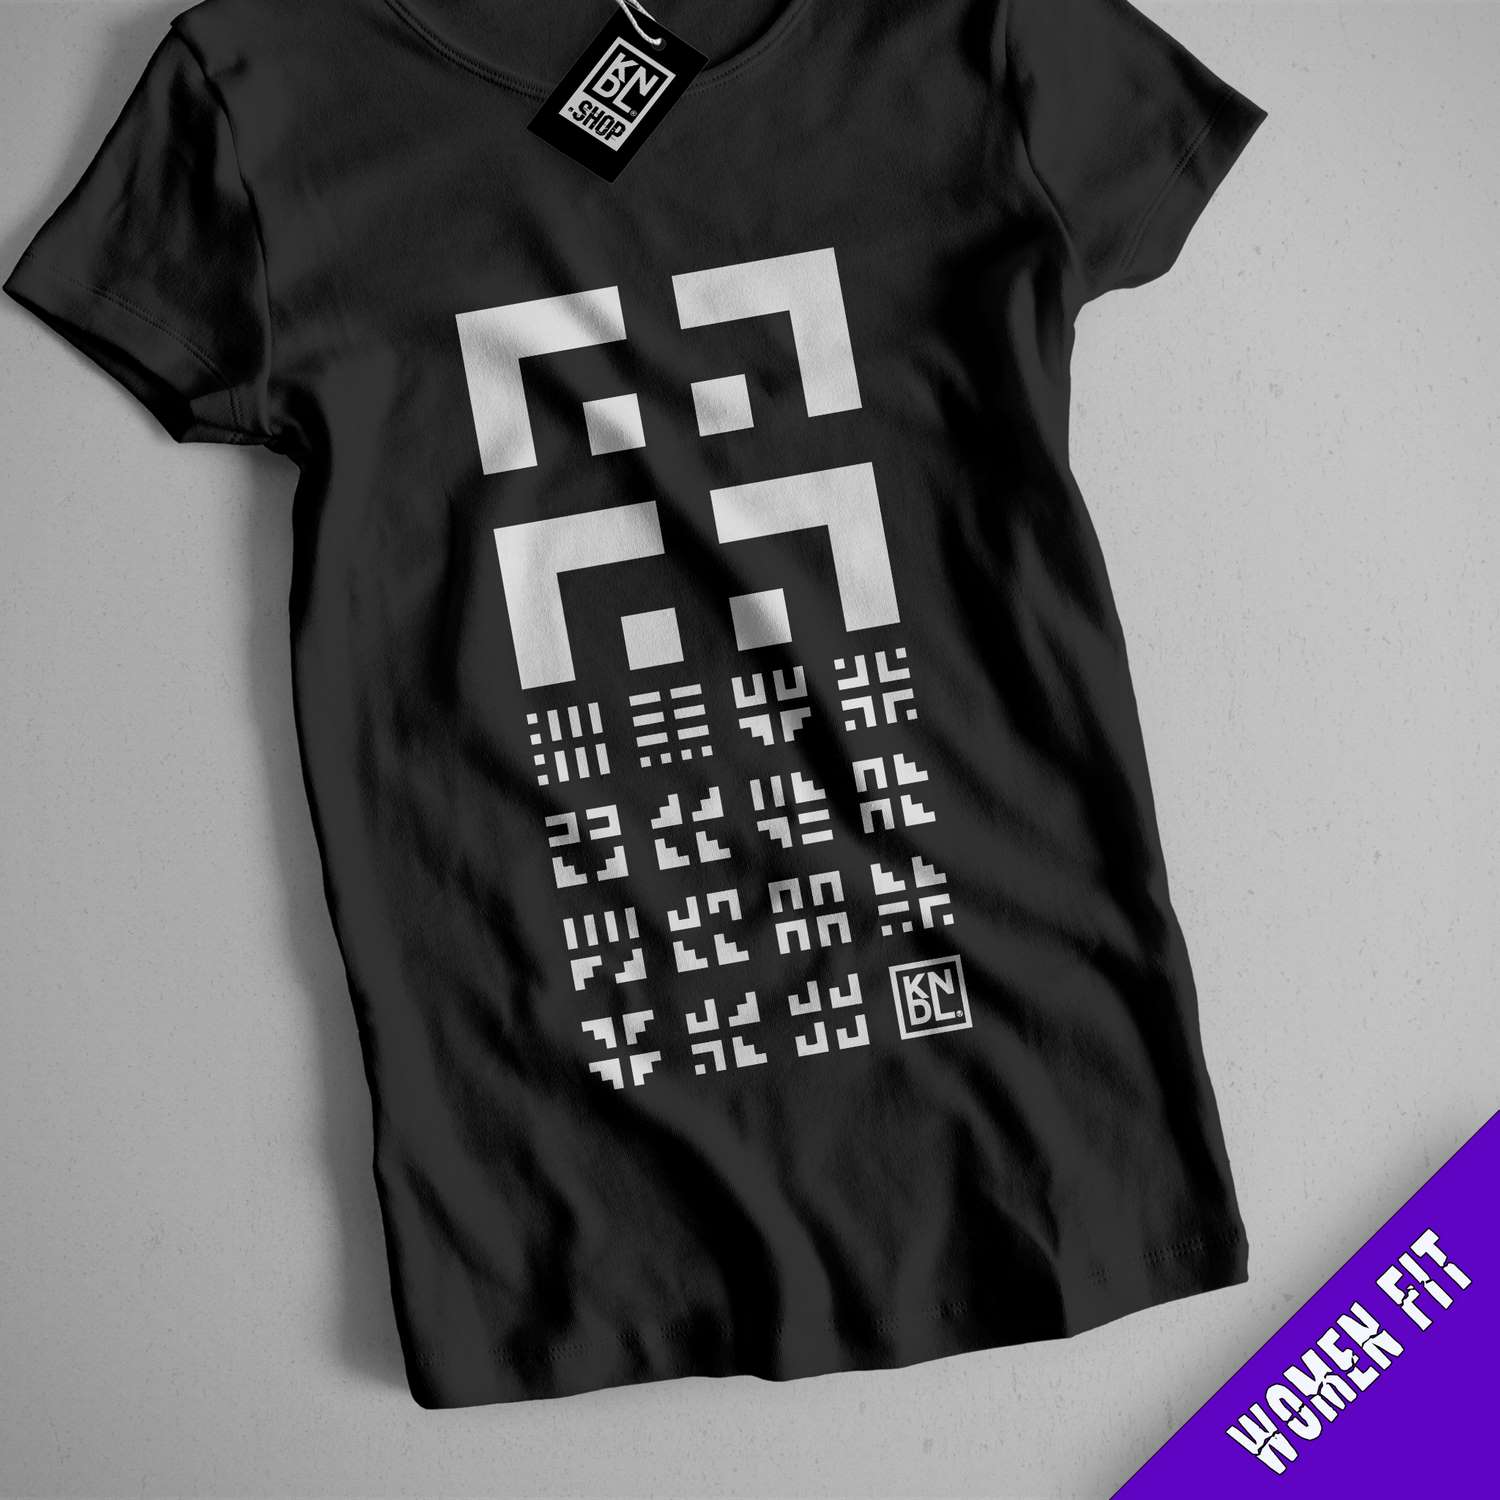 a black t - shirt with a pixel design on it